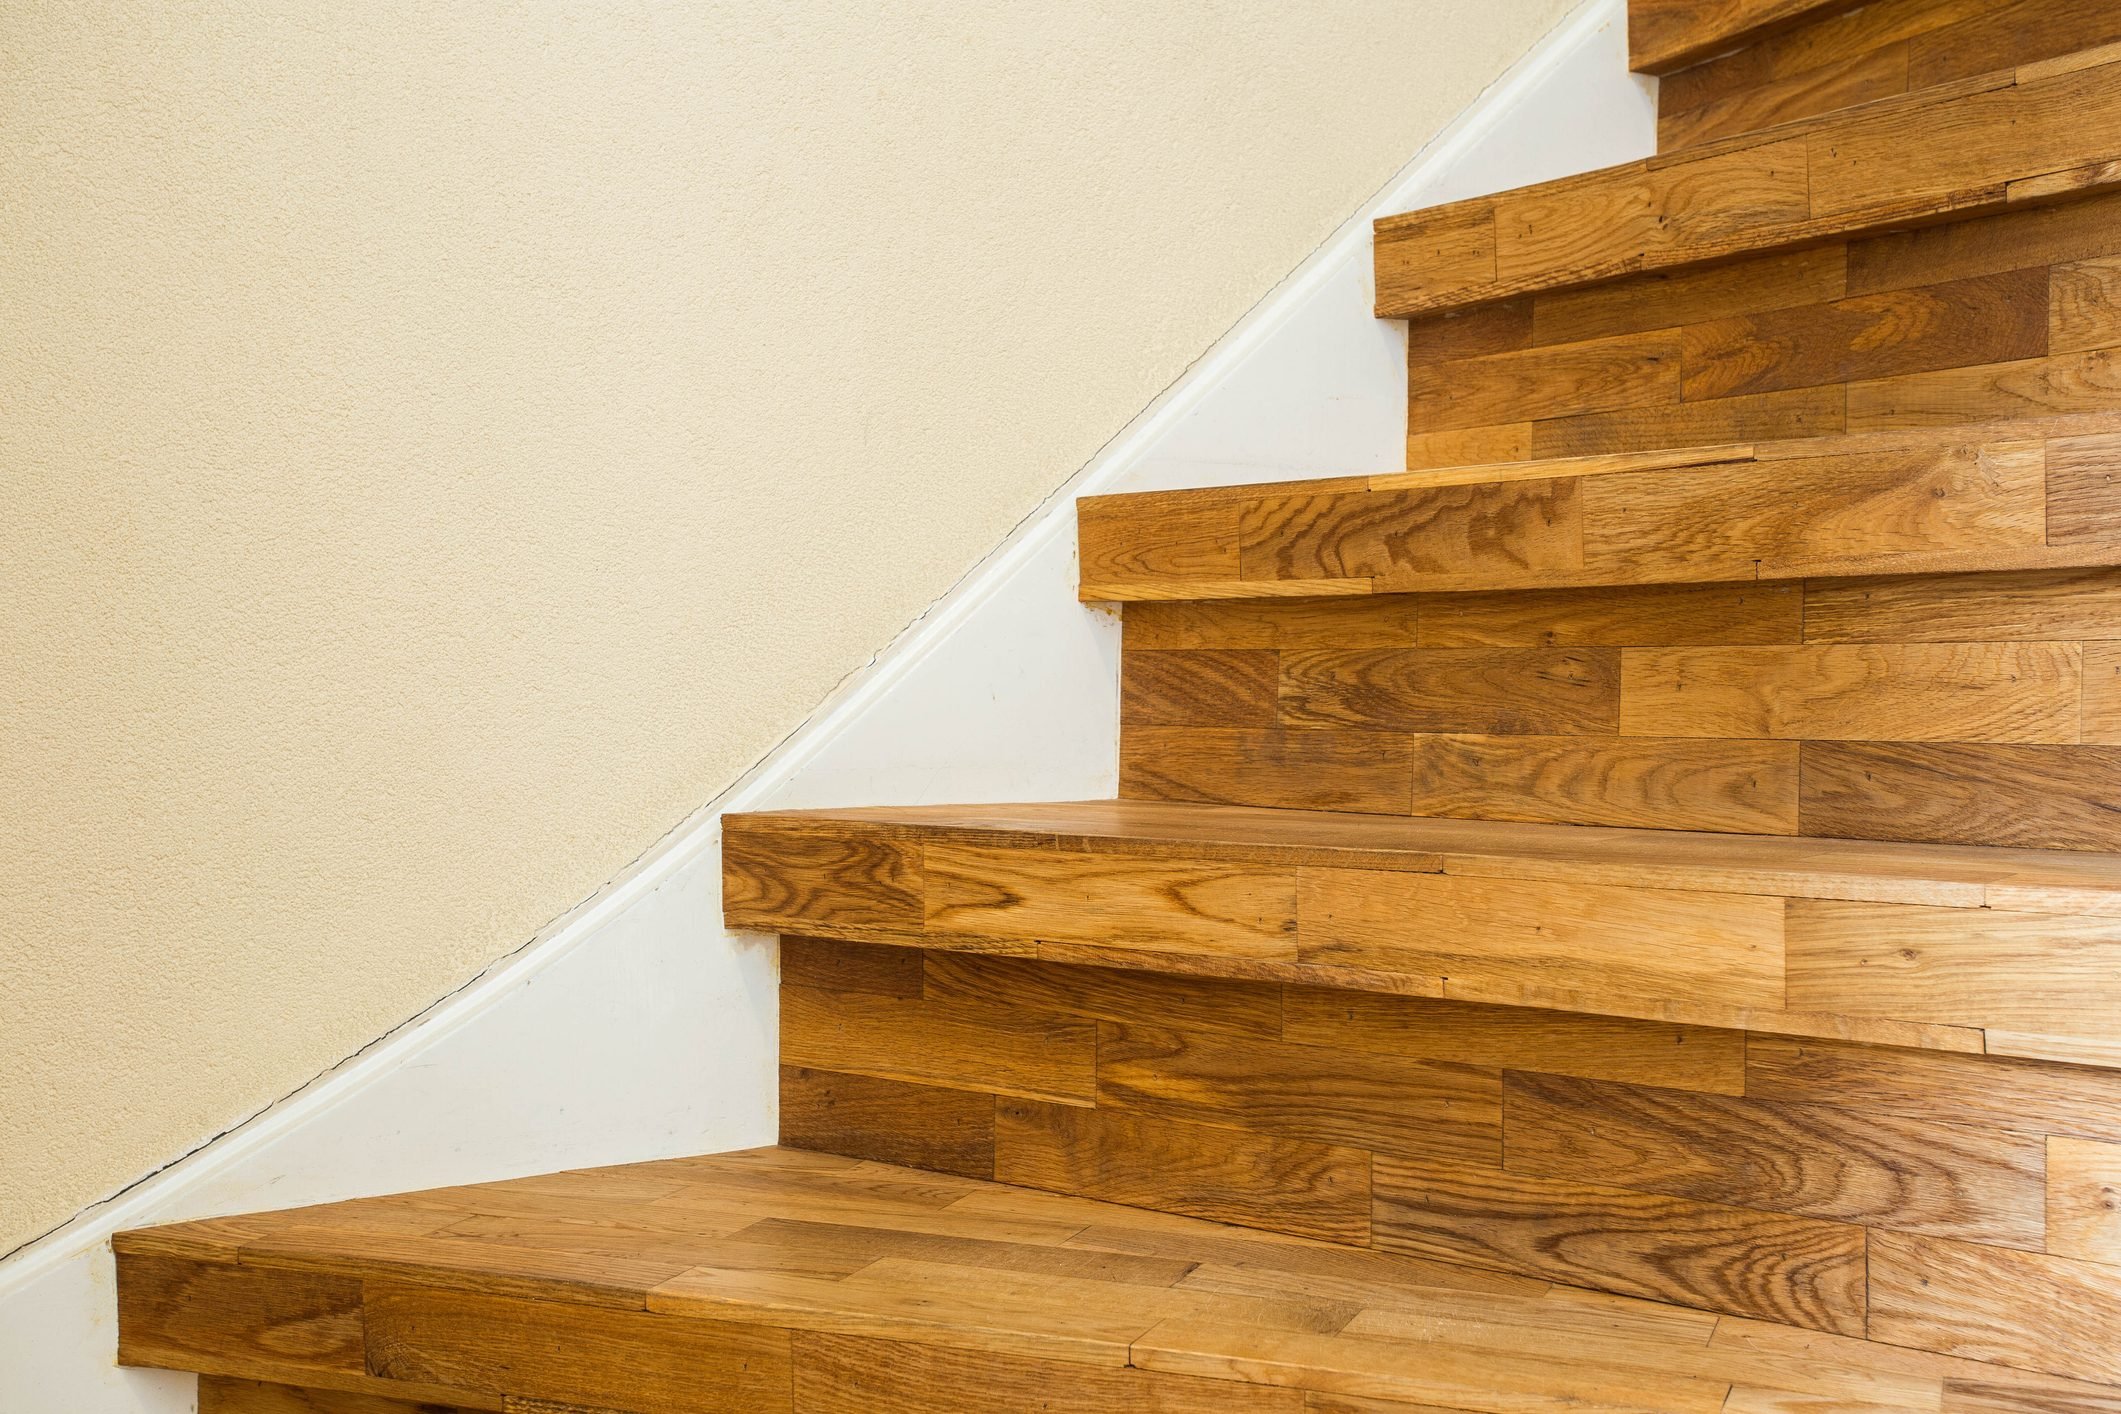 Part of the wooden stairs, close up modern home design